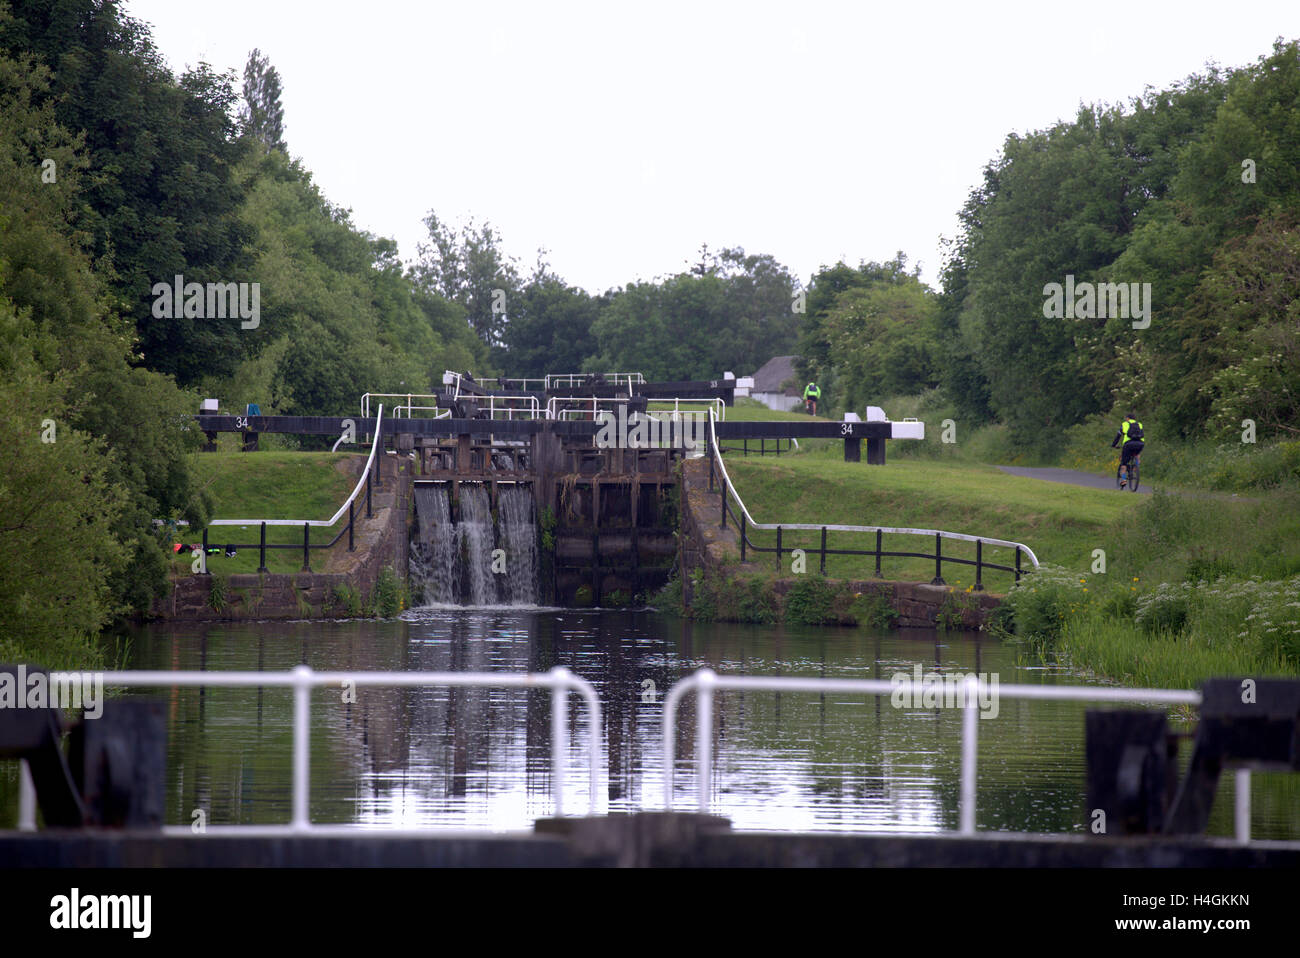 Forth and Clyde canal, Glasgow Stock Photo